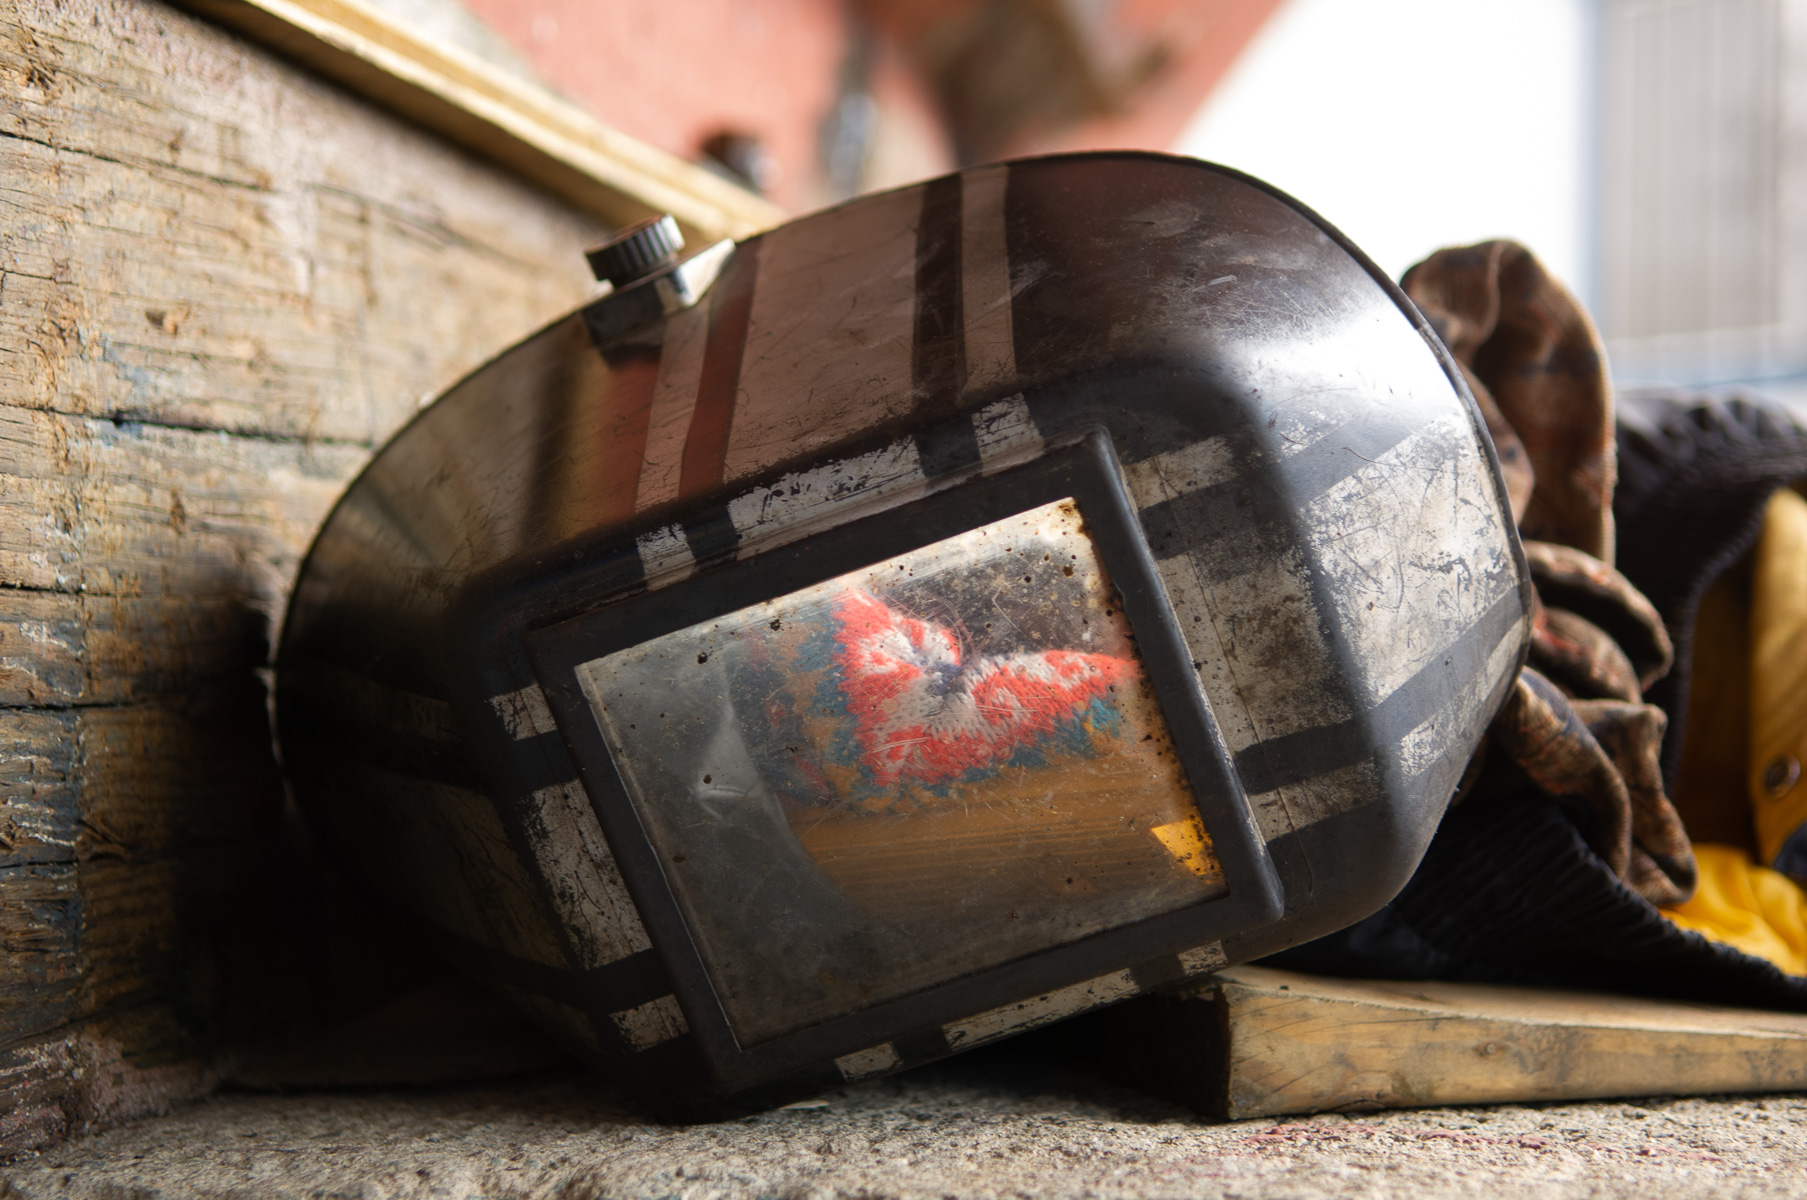 Welding mask on commercial industrial work site